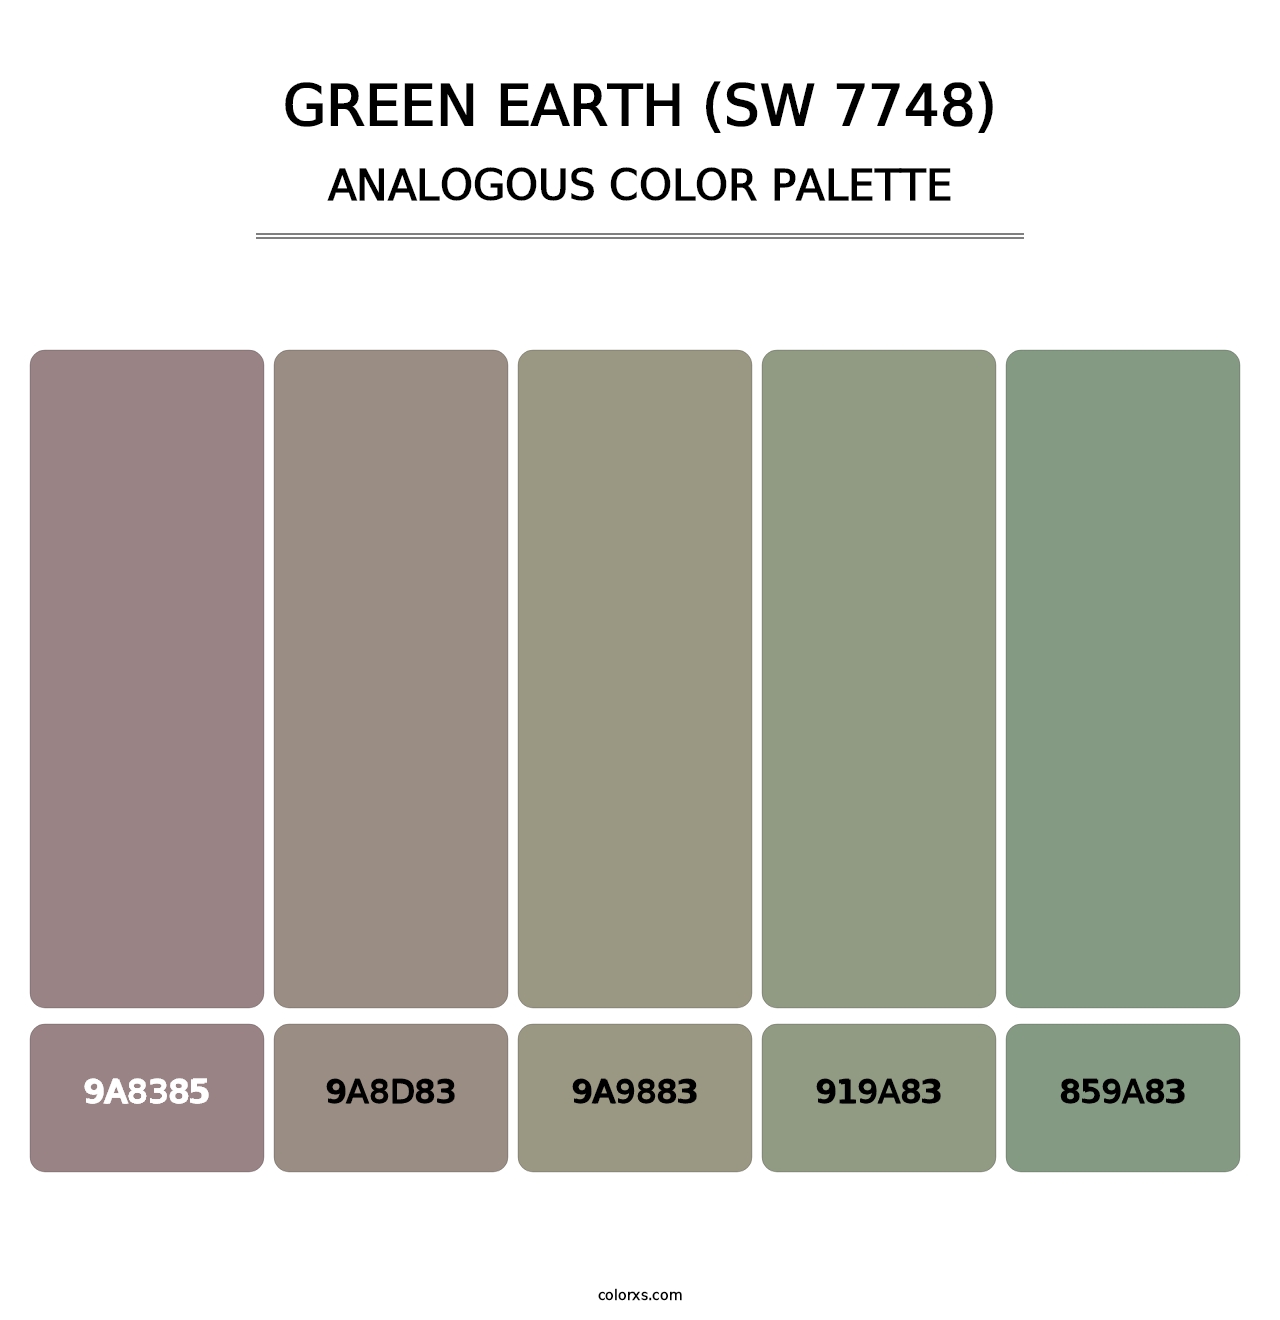 Green Earth (SW 7748) - Analogous Color Palette